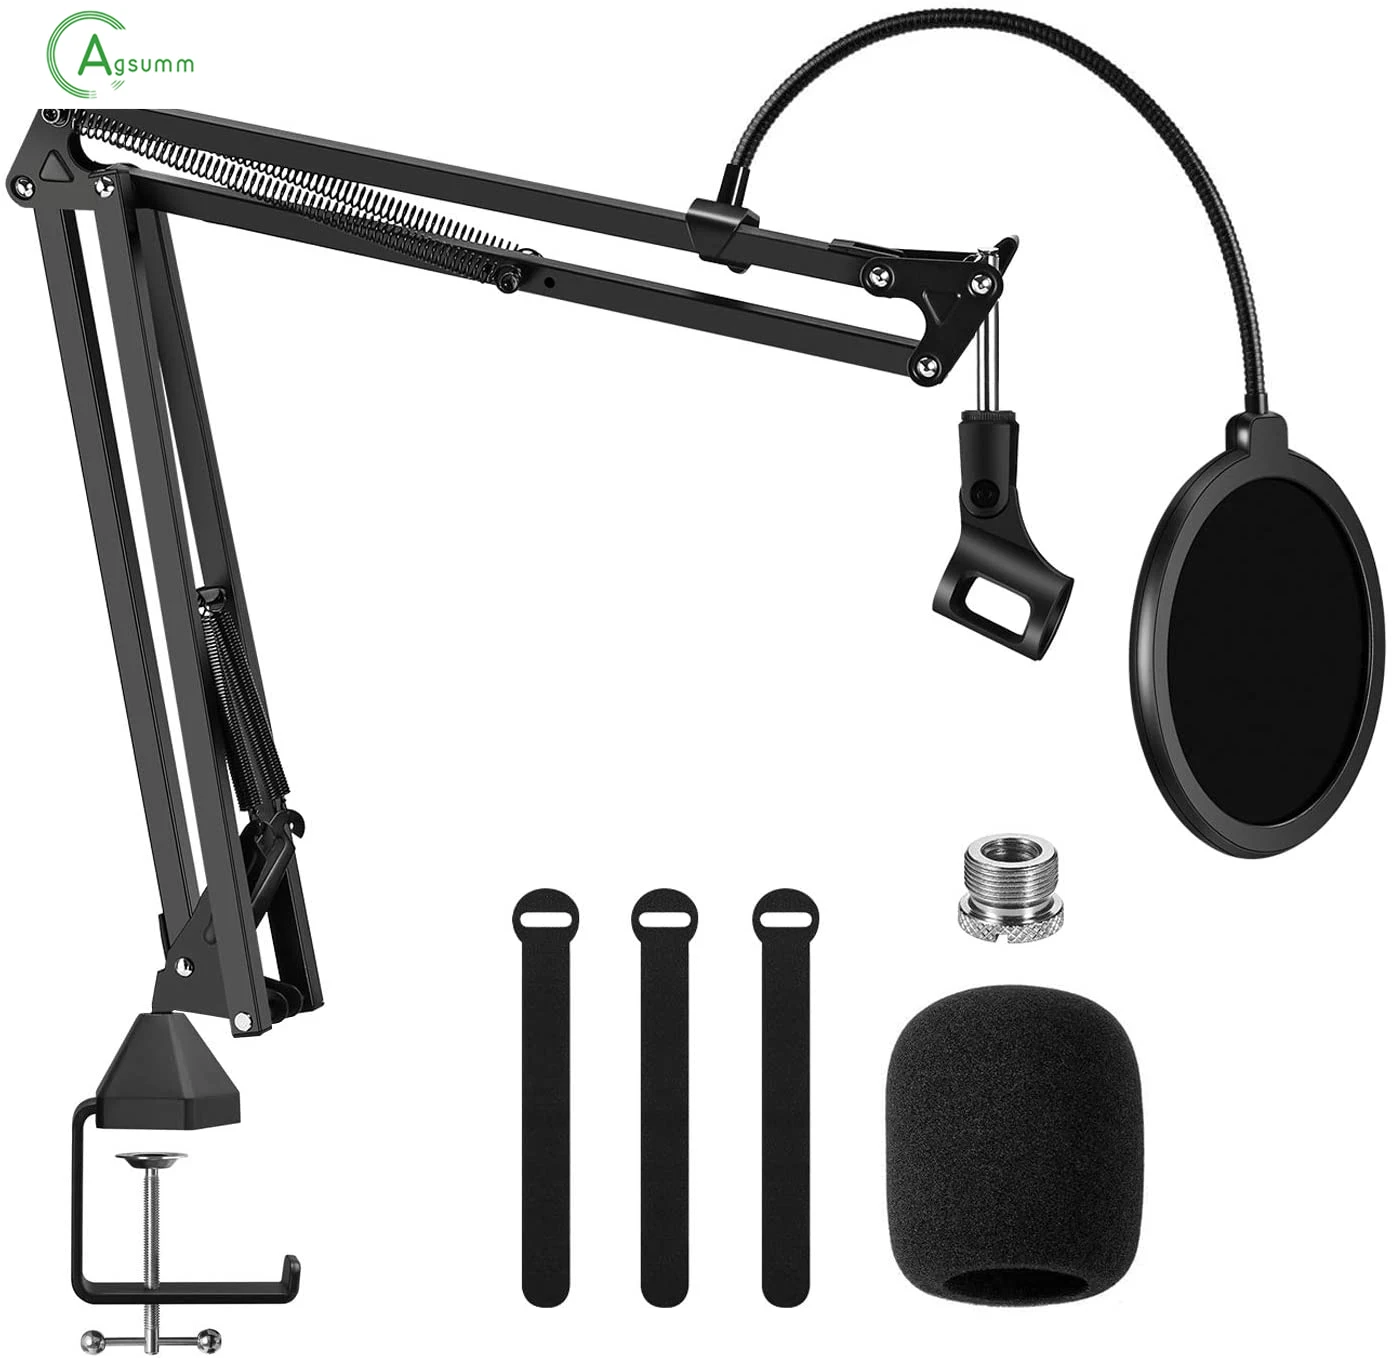 

AGS-P19 Microphone Stand for Recording mic Adjustable Suspension Boom Scissor Arm Stand with Windscreen Pop Filter, Black